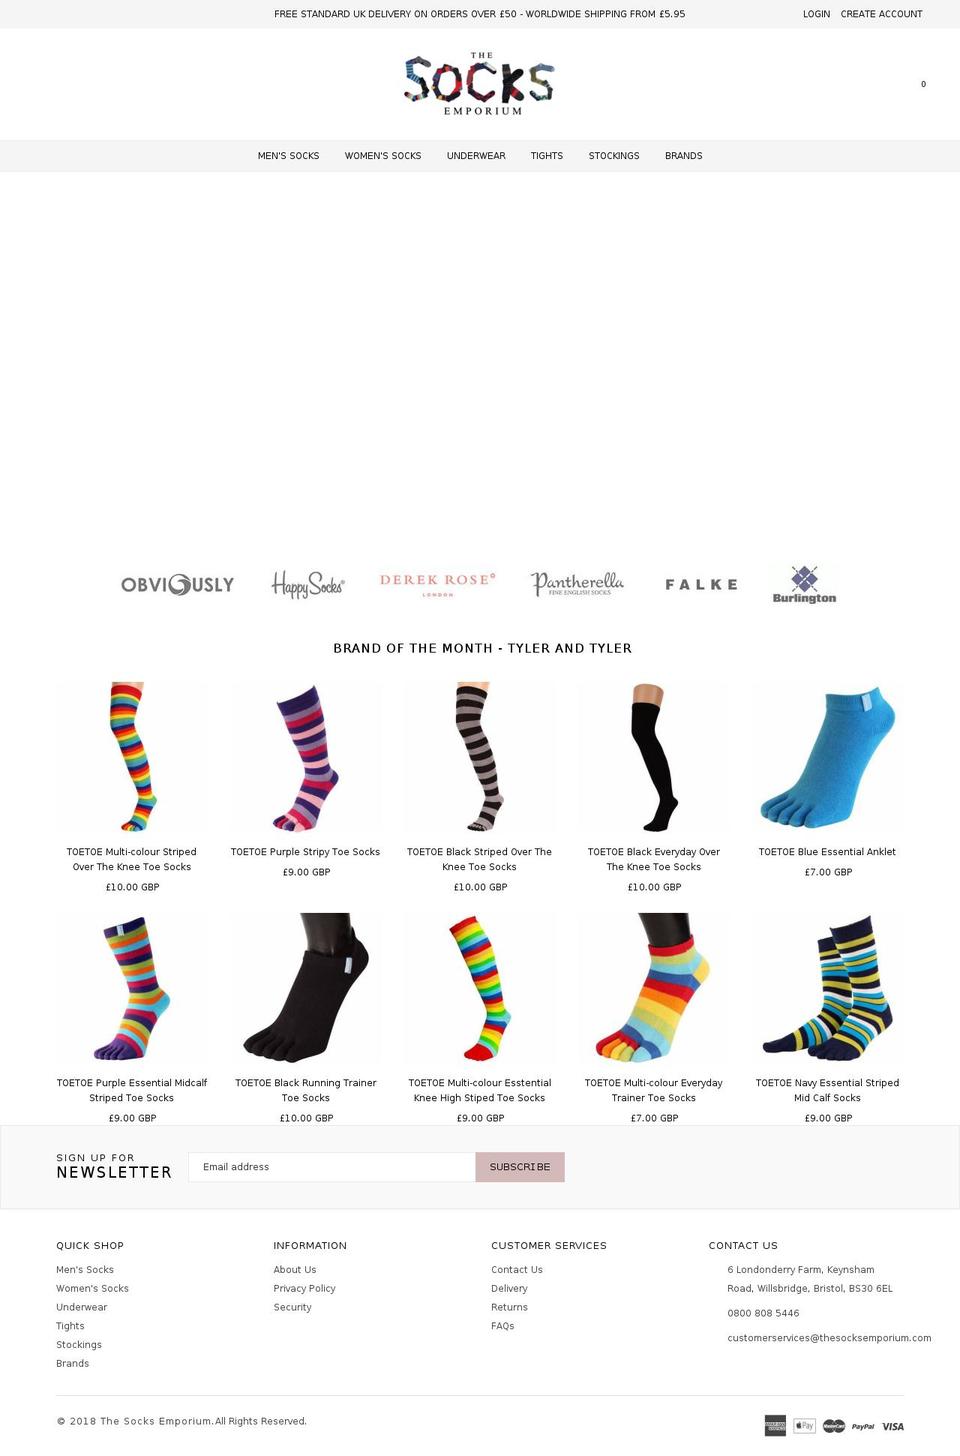 belle-original-with-bold-currency Shopify theme site example kjbeckettsocks.com